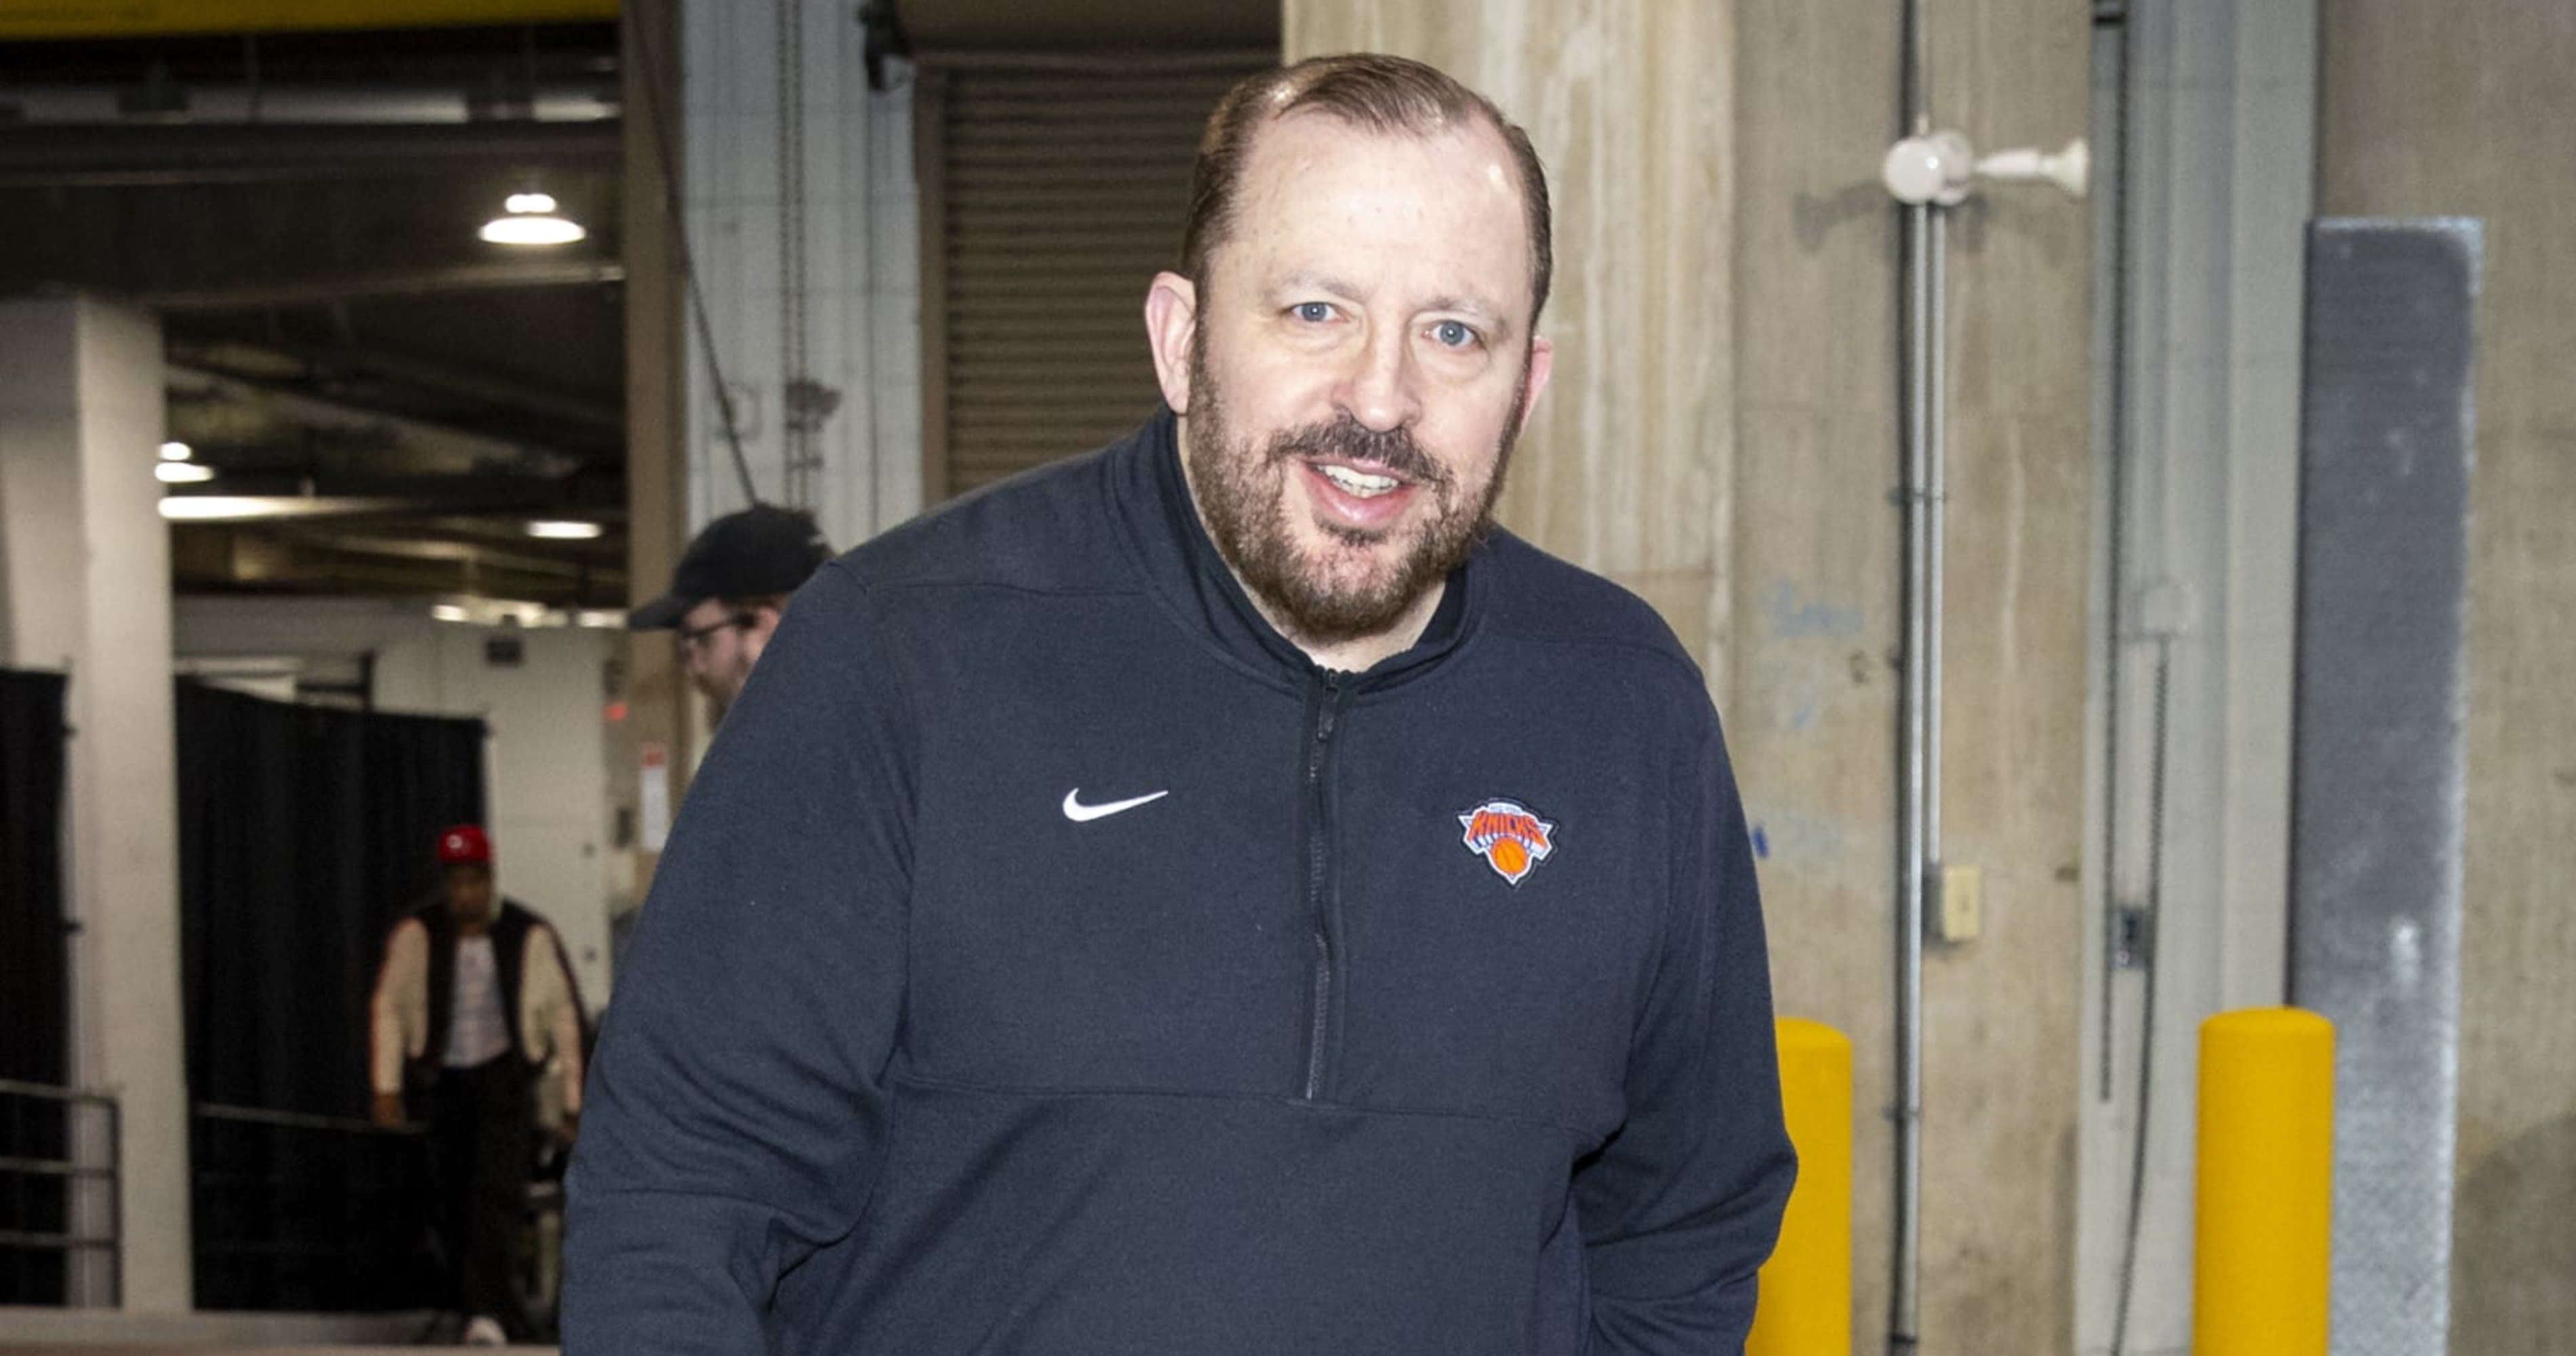 Knicks Rumors: Tom Thibodeau Contract Extension Eyed, Could Approach $10M Per Year